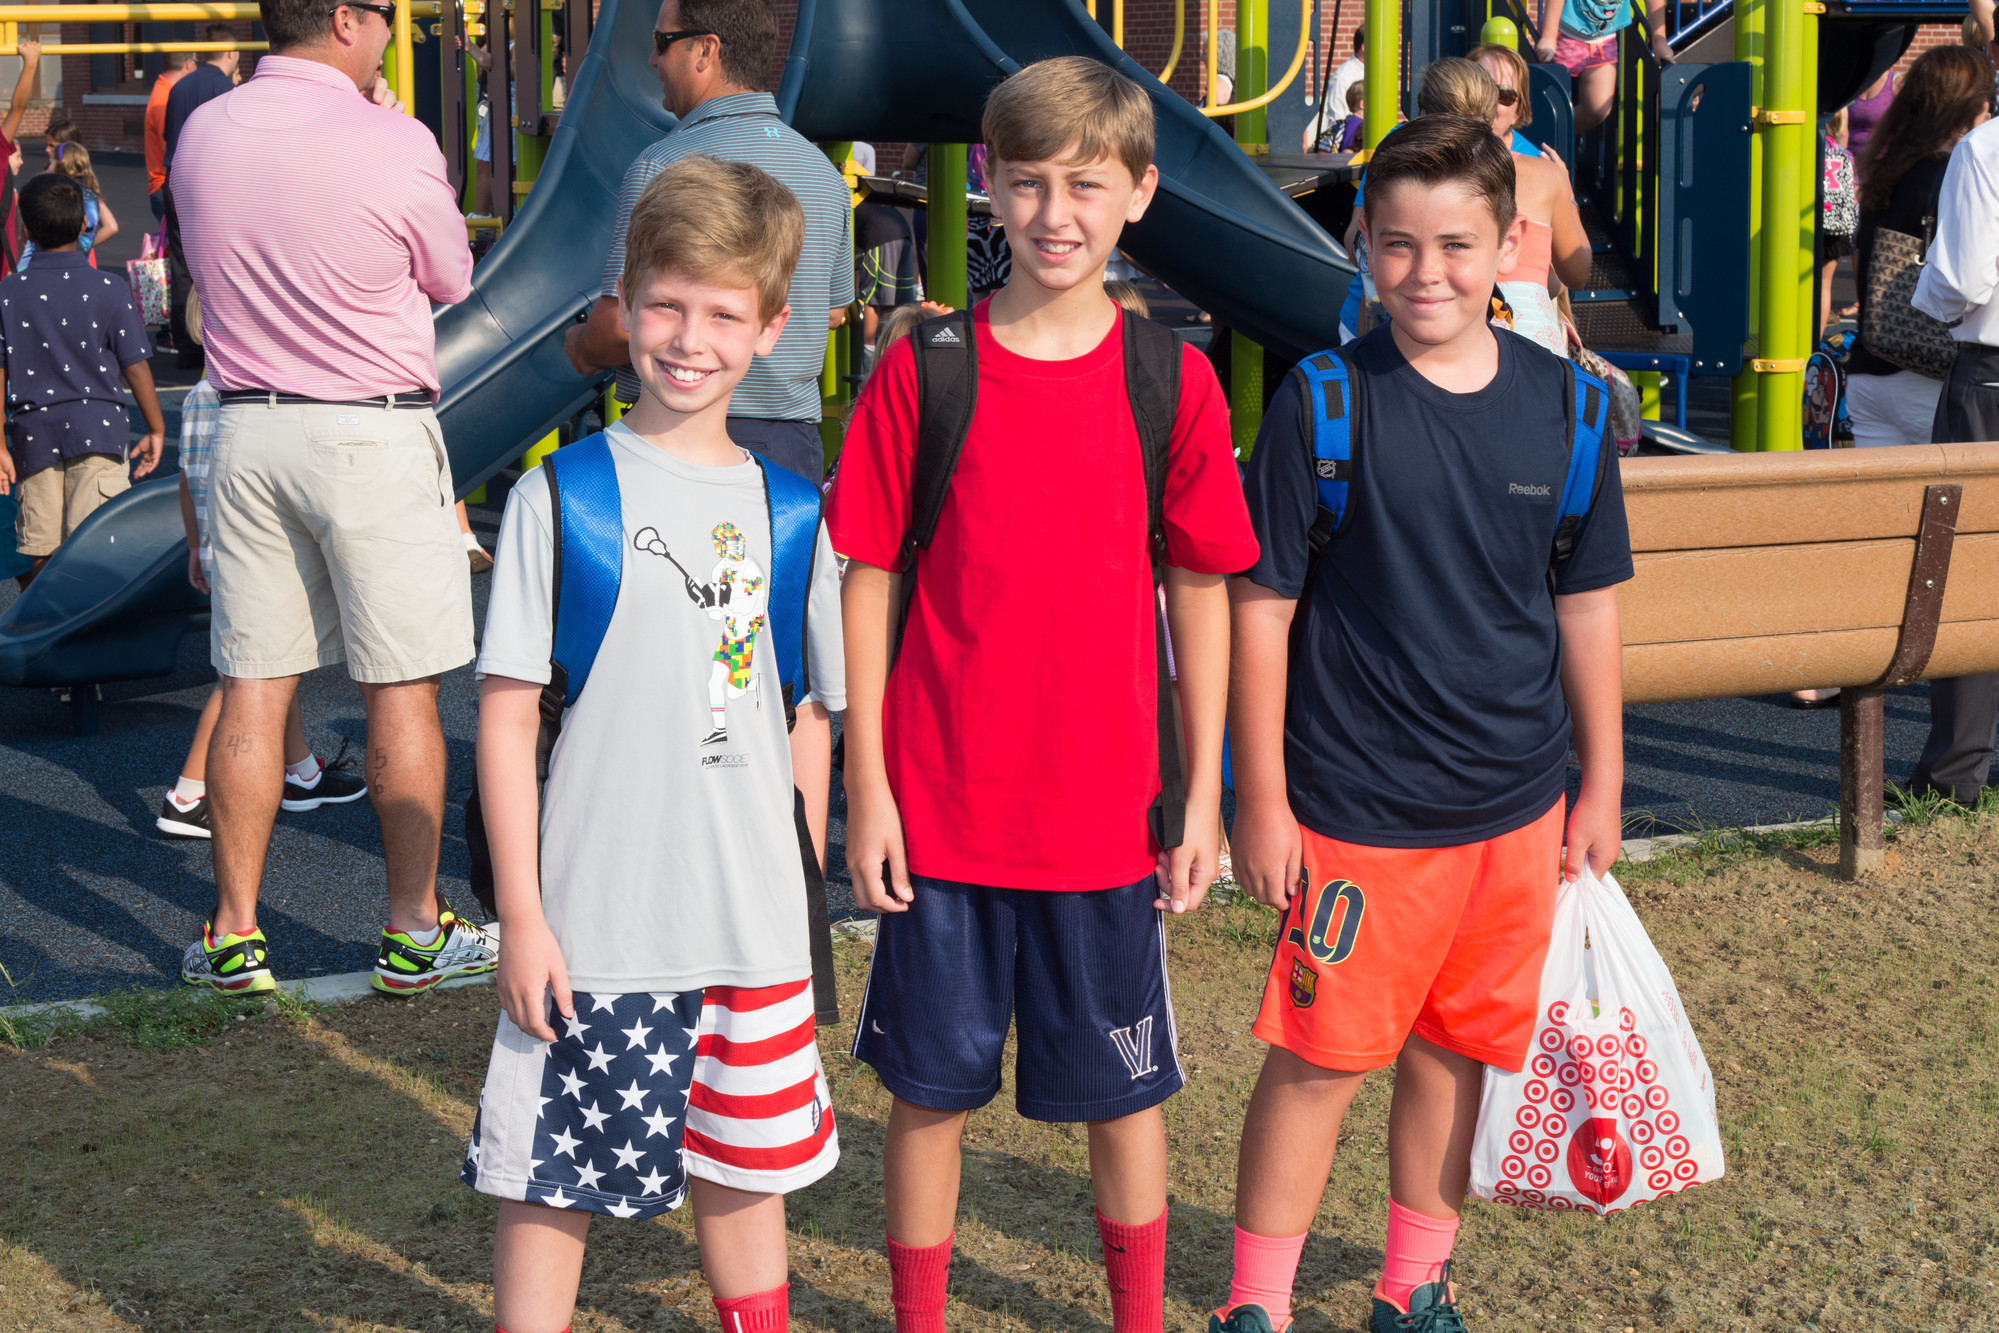 Jake Greene, left, Chris Rosenbaum and Miles McGovern were all ready for their first day of fifth grade at Watson Elementary School on Tuesday. (Eric Dunetz/Herald)